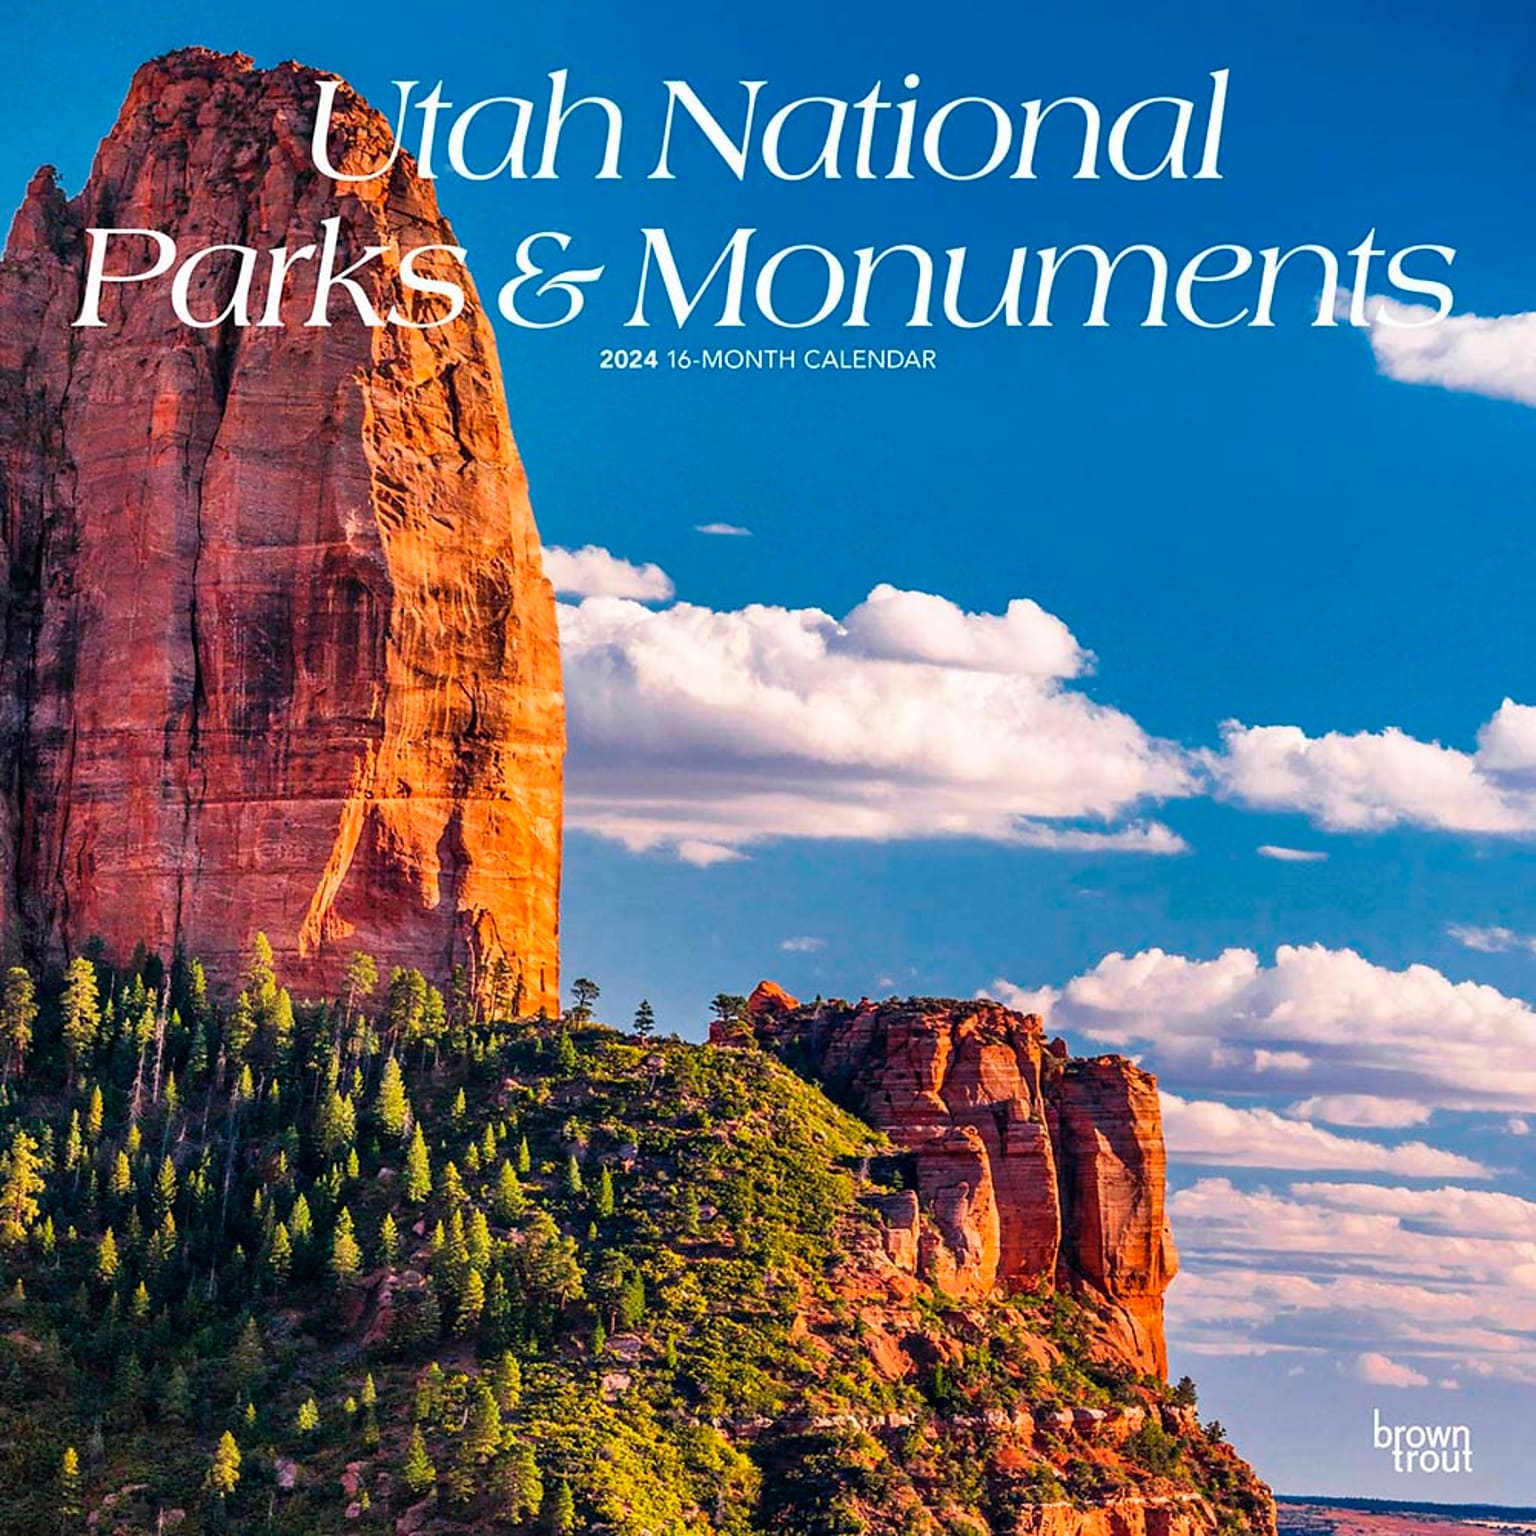 2024 BrownTrout Utah National Parks & Monuments 12 x 12 Monthly Wall Calendar (9781975467302)